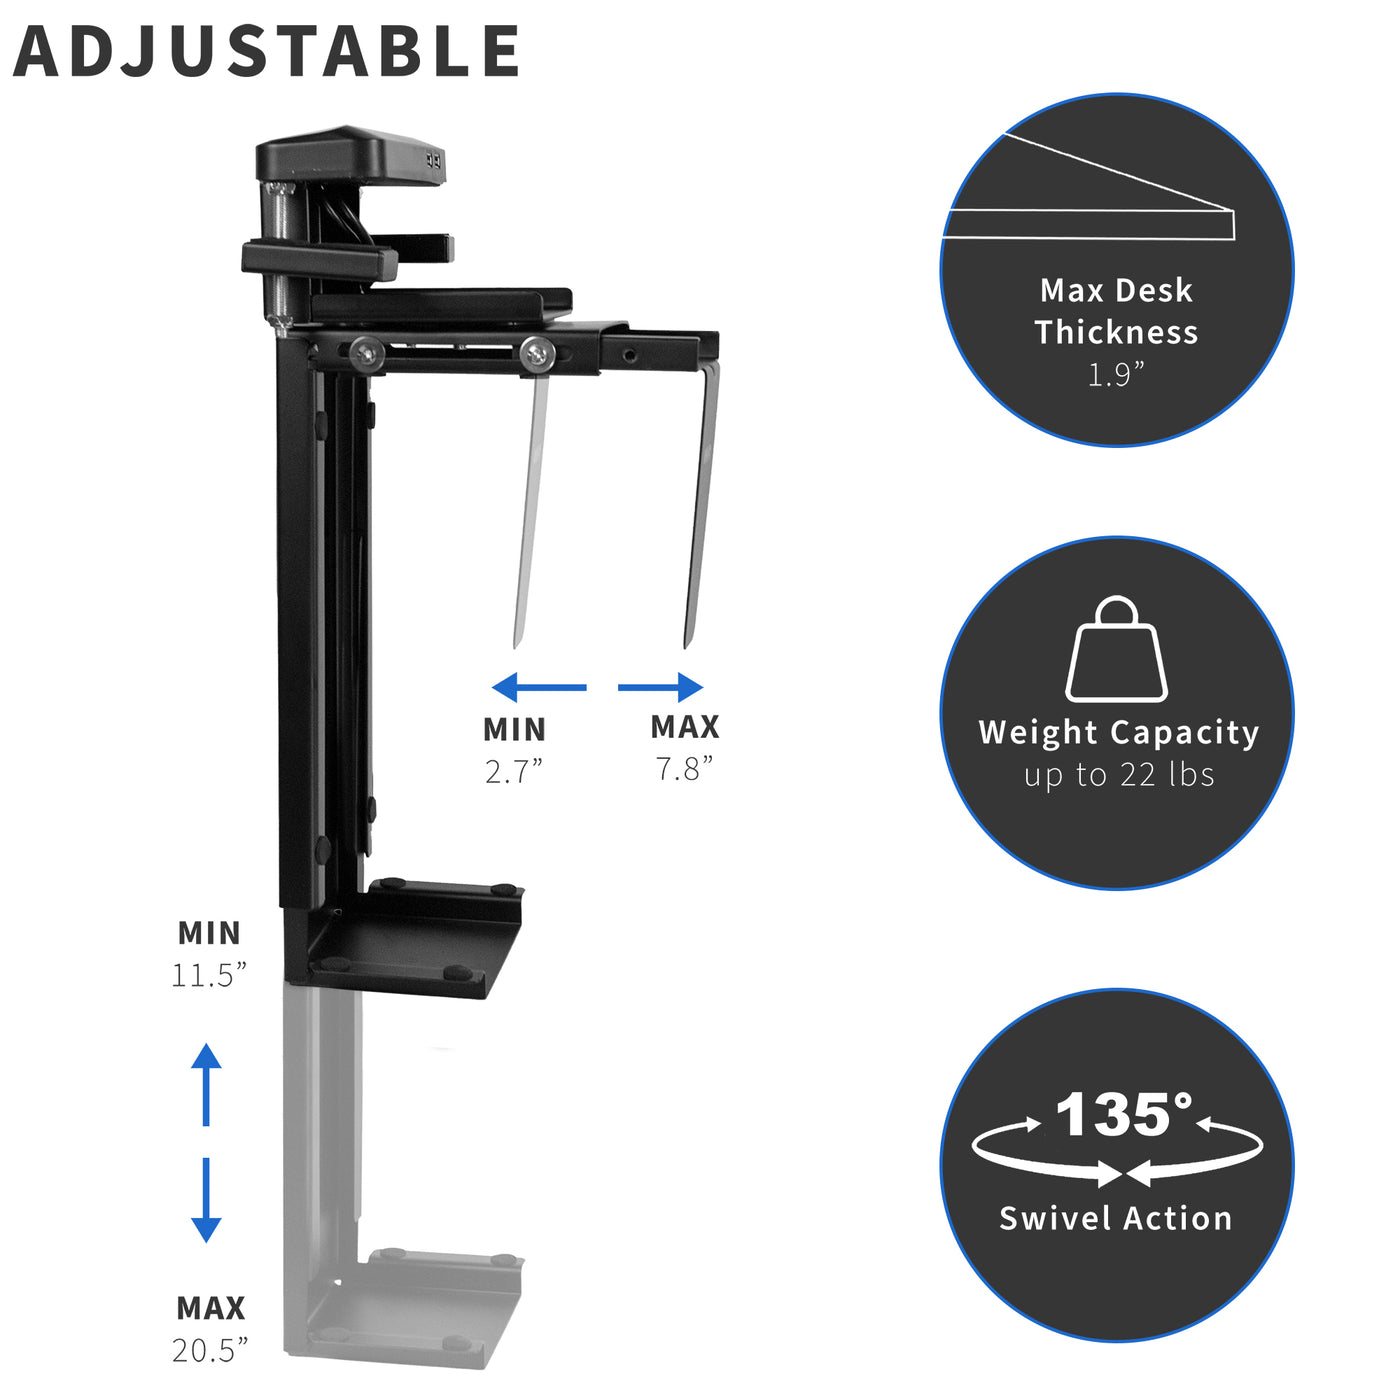 Sturdy adjustable clamp-on mount computer holder with USB ports for convenient charging and connecting to PC.